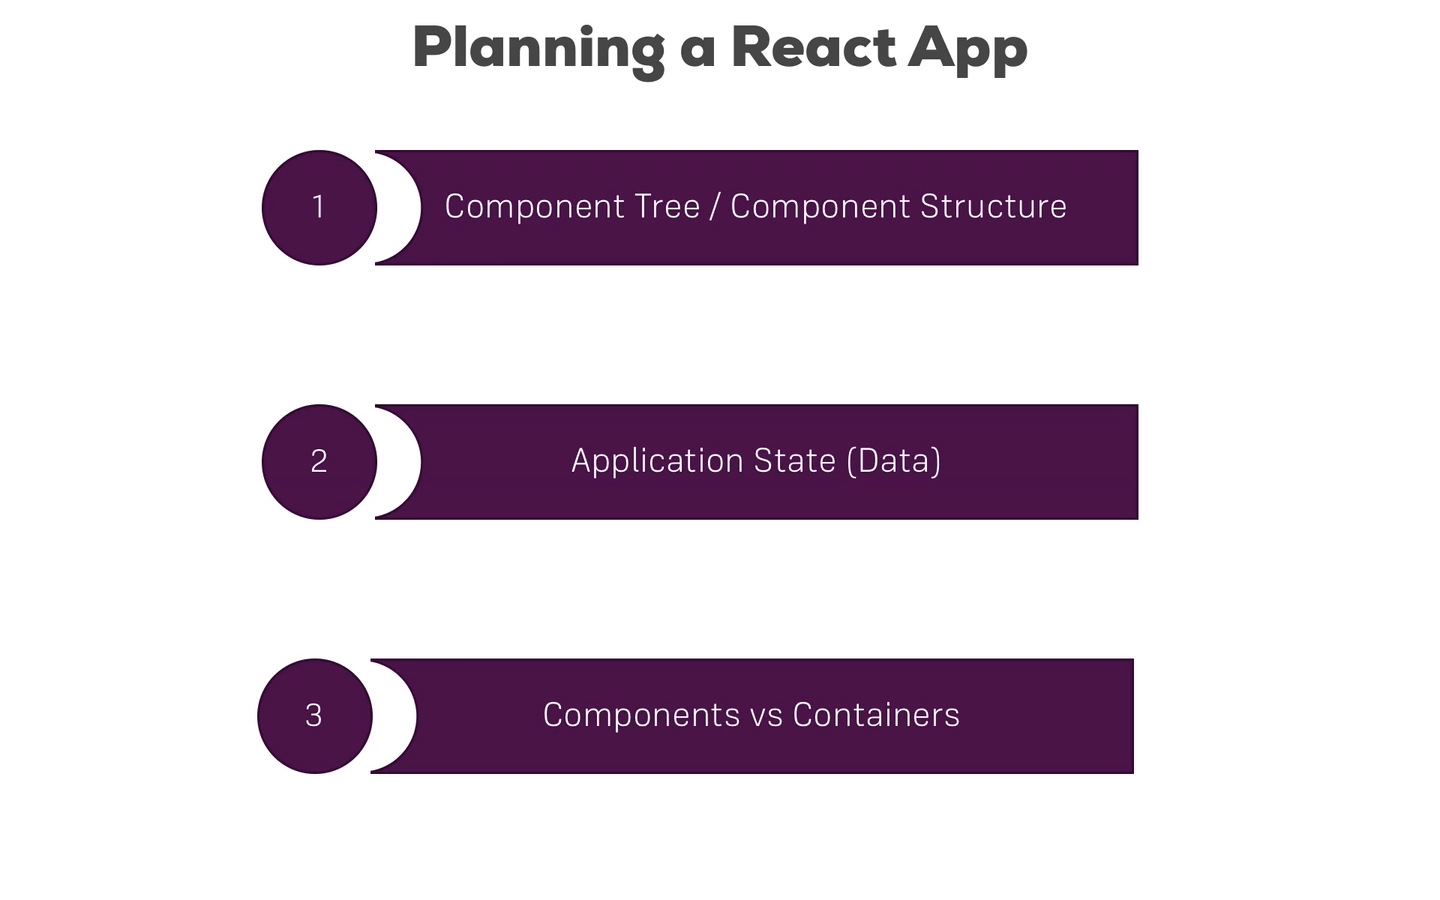 Three important steps in planning React app